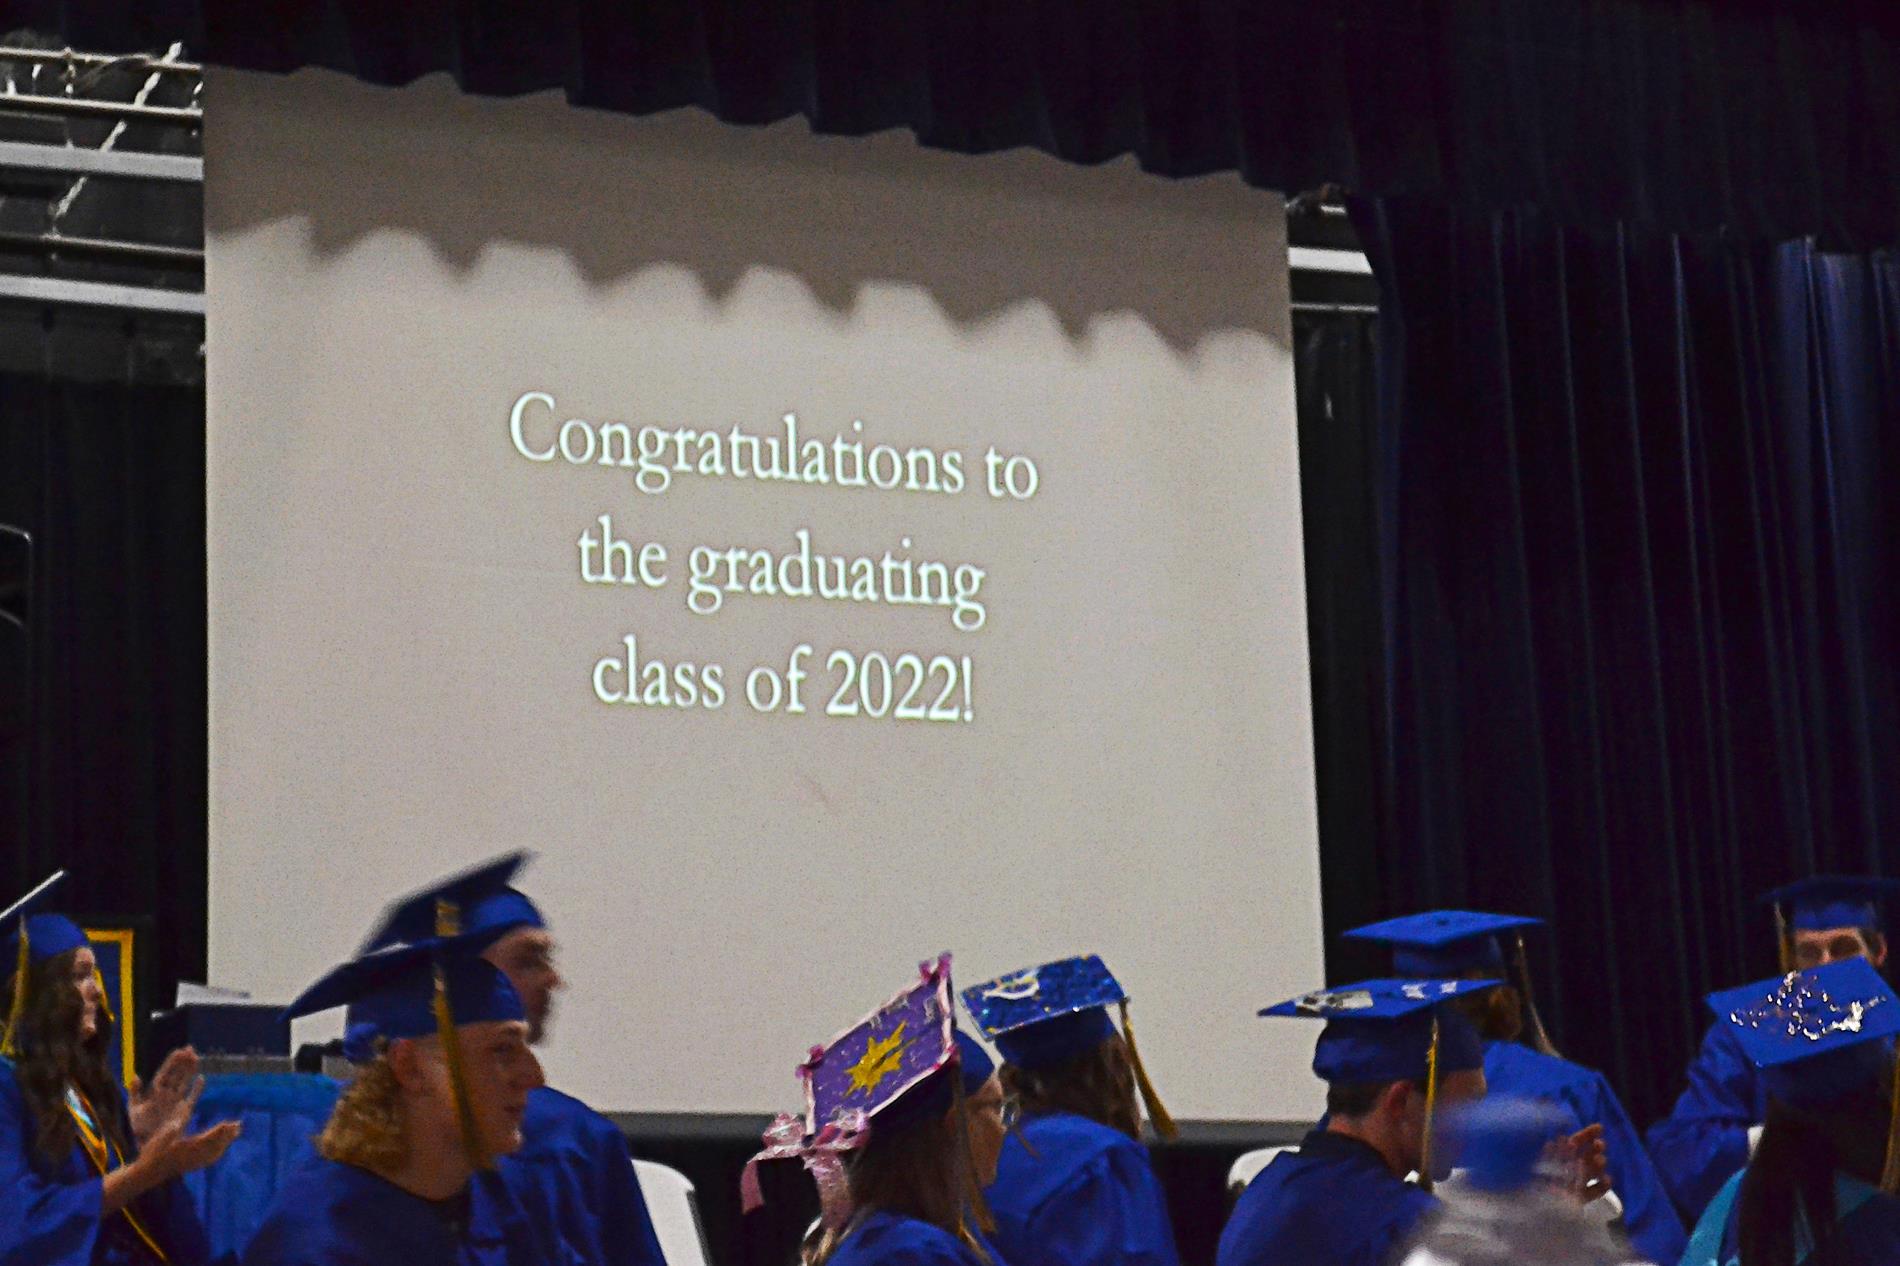 End of senior slideshow reading "Congratulations to the Graduating Class of 2022"